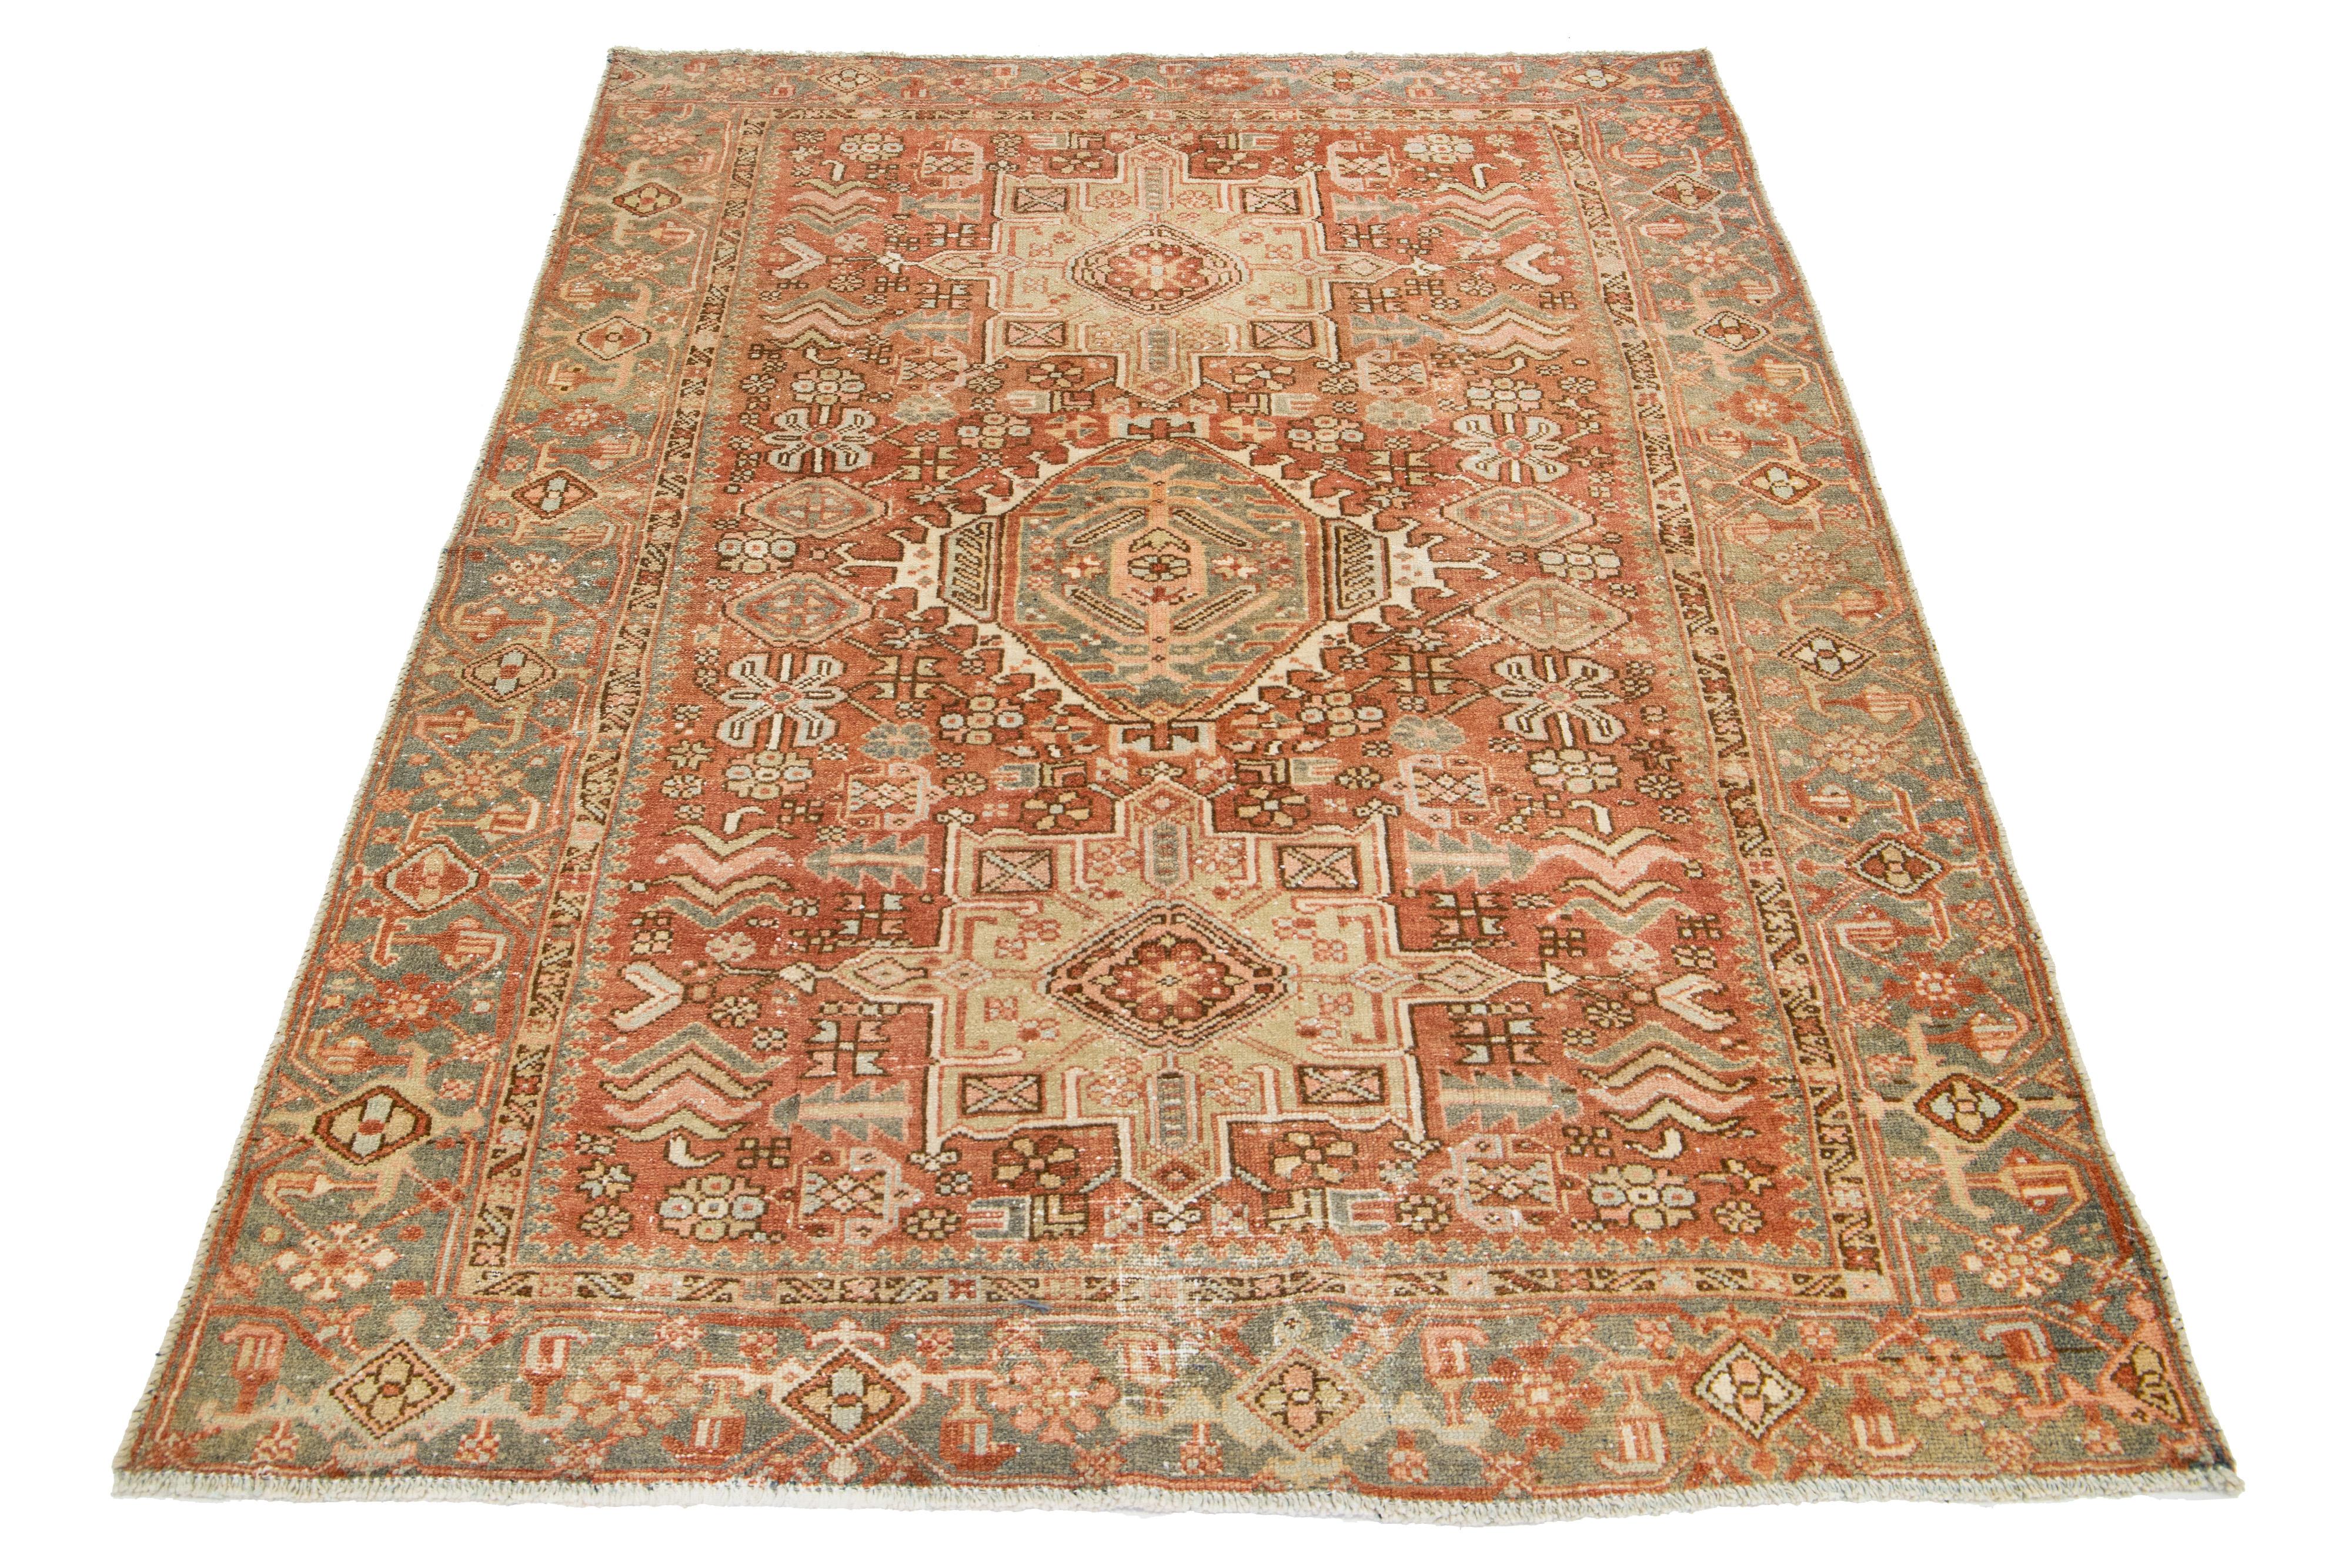 This antique Persian Heriz rug is made with hand-knotted wool. The rust-orange field showcases a captivating tribal pattern adorned with beige, peach, gray, and brown shades.

This rug measures 4'6